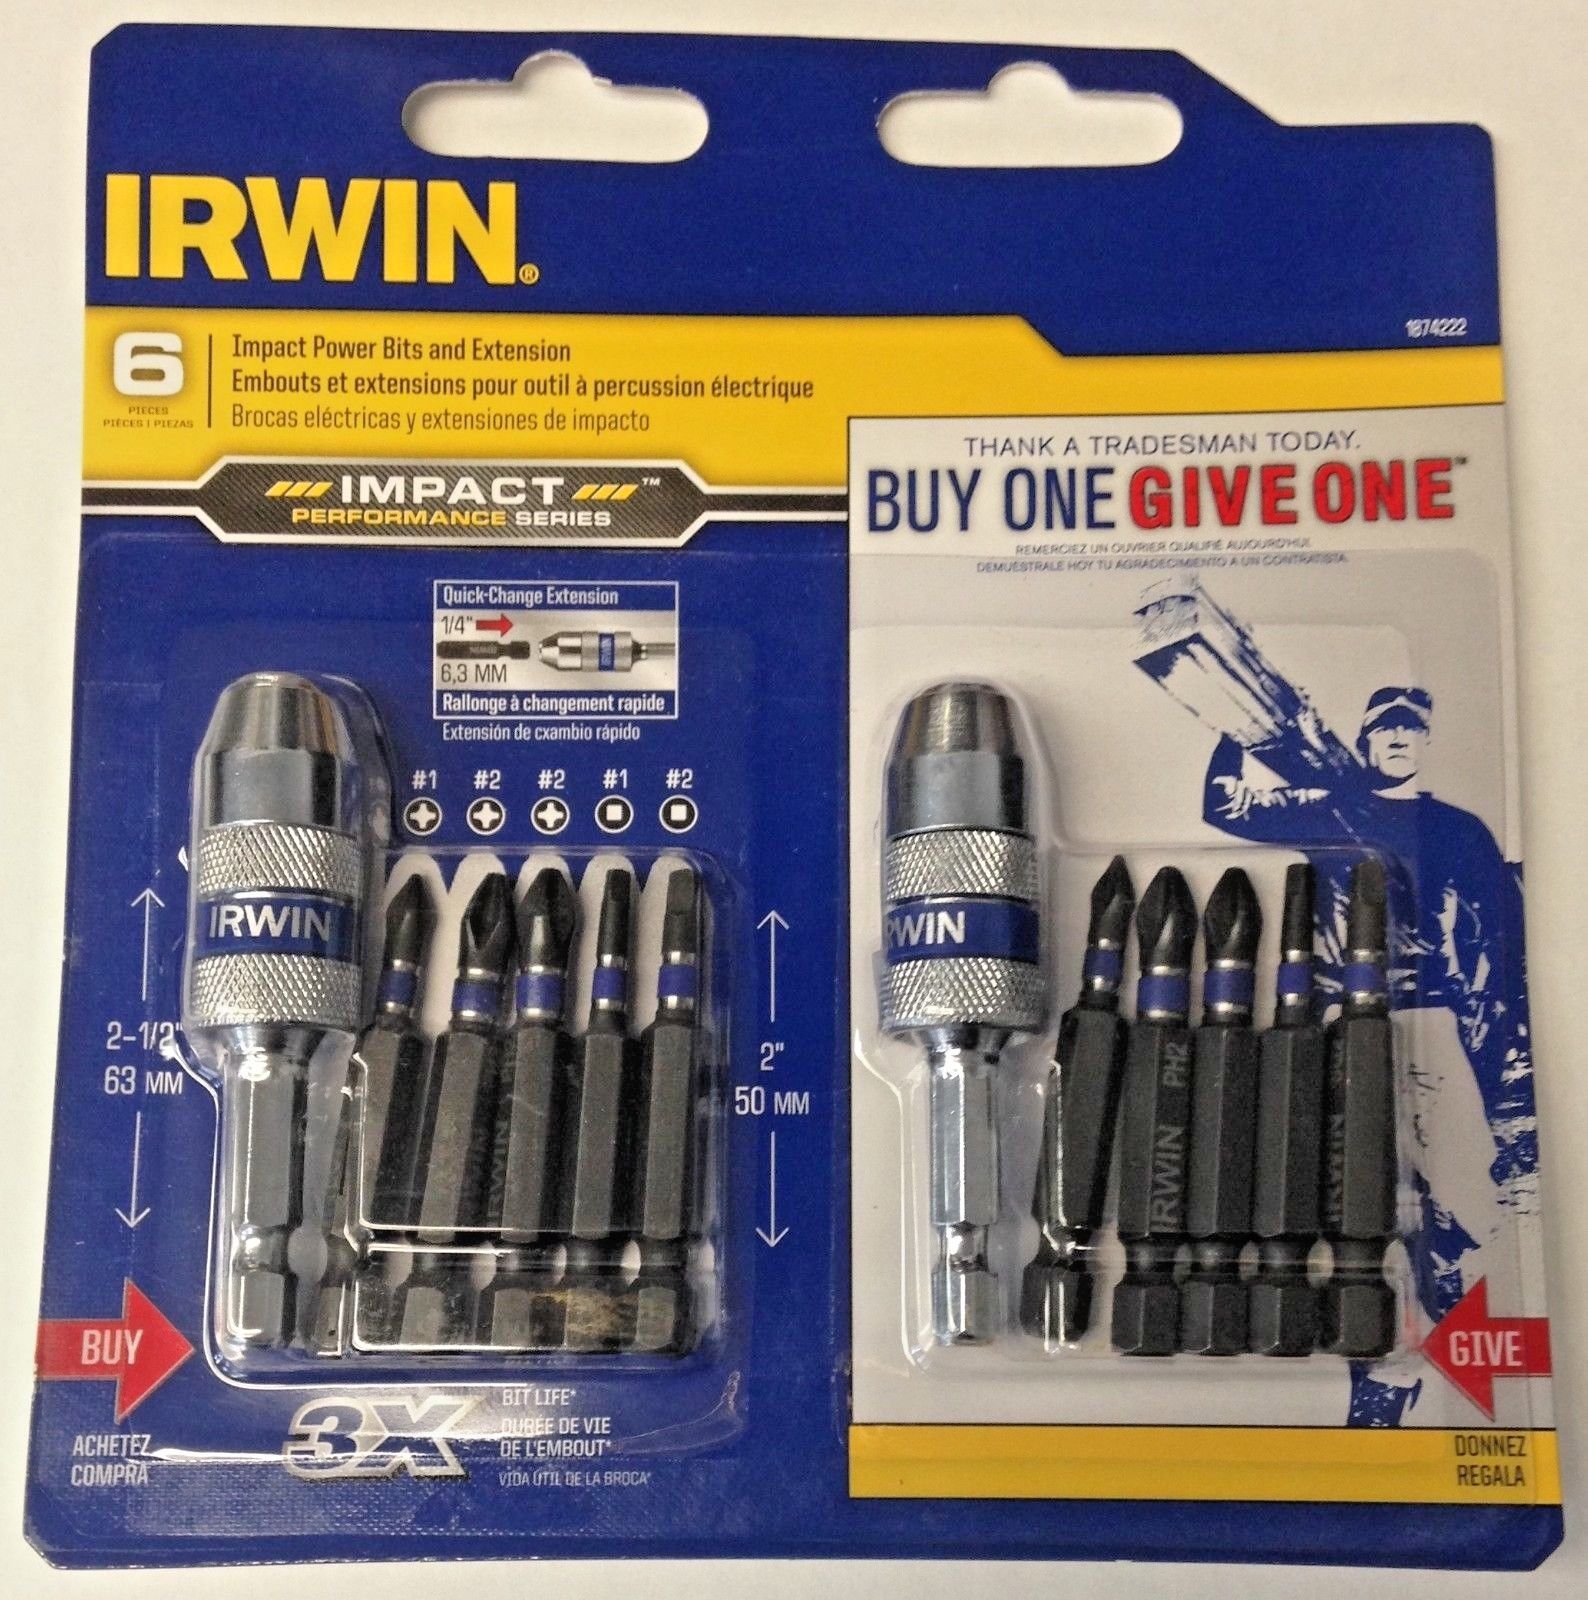 Irwin 1874222 Impact Power Bits And Extension 6 Piece Set x 2